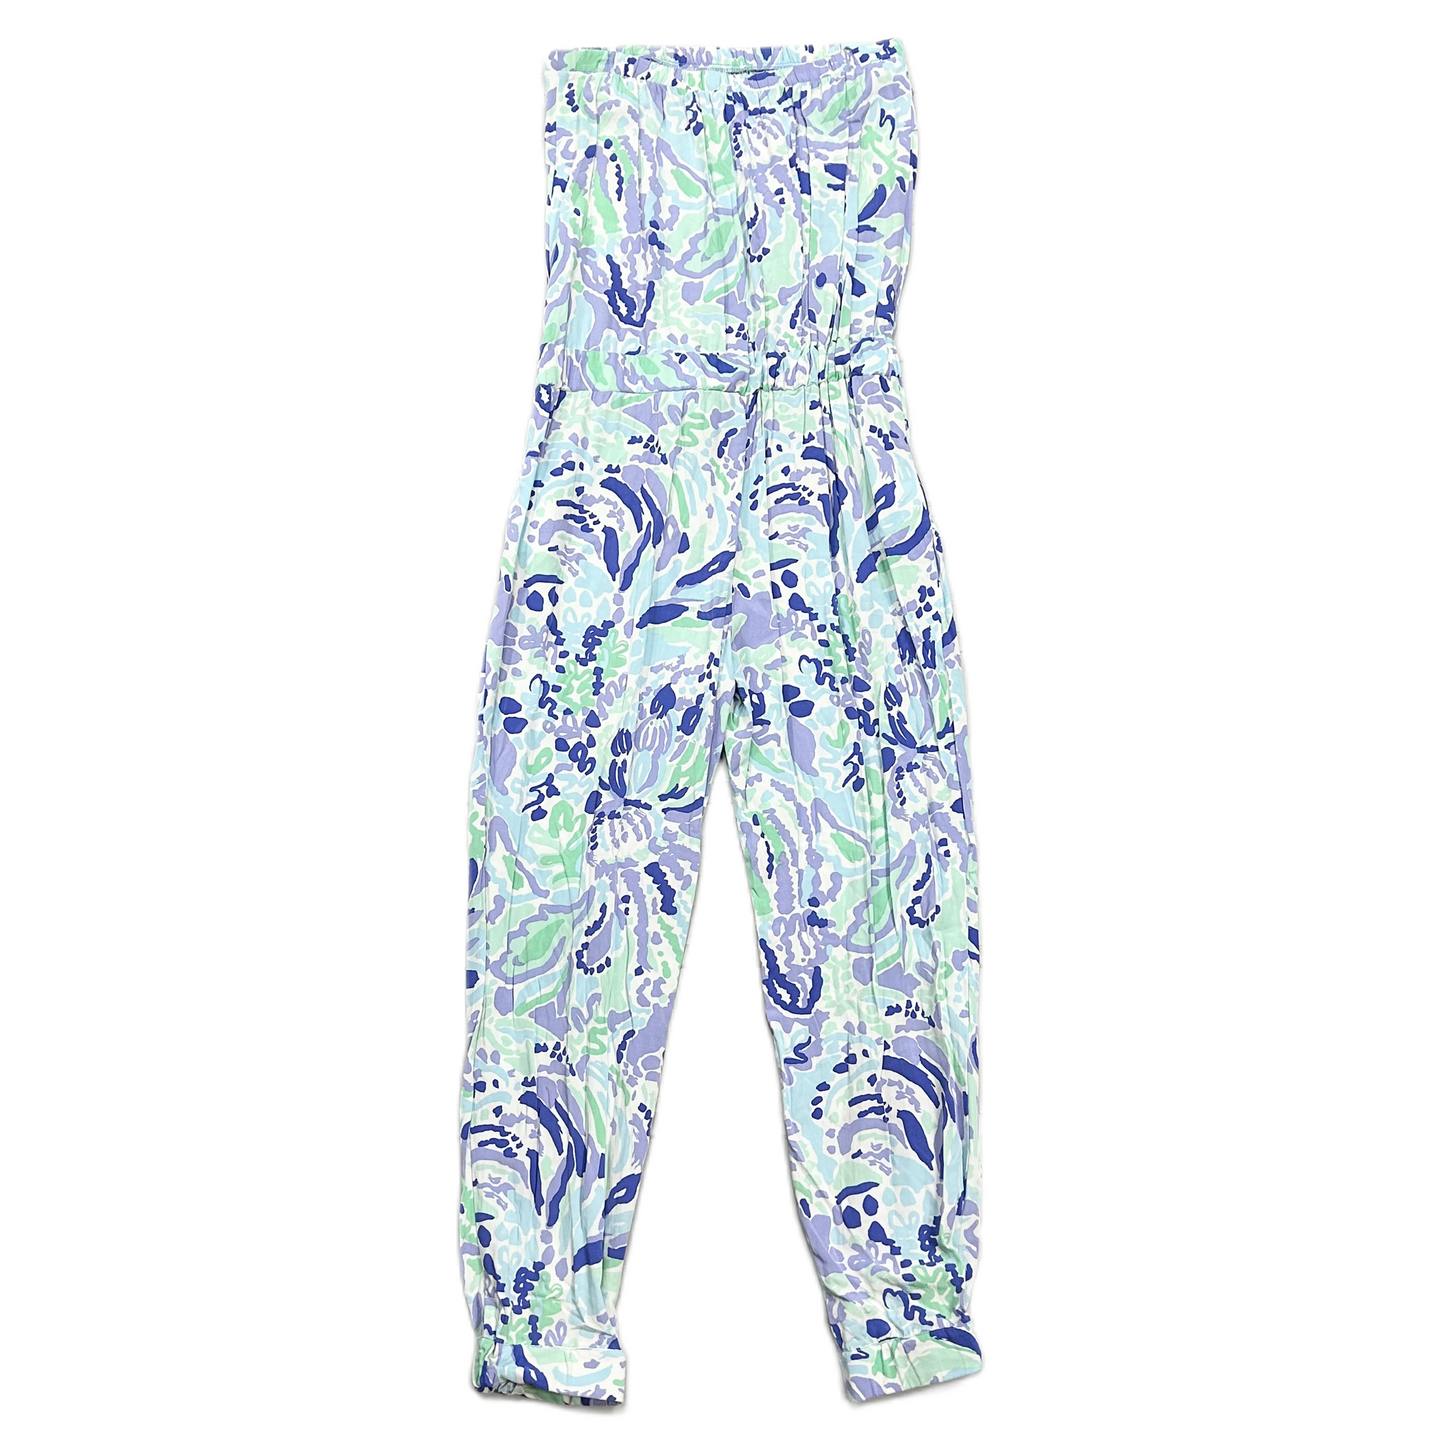 Jumpsuit Designer By Lilly Pulitzer  Size: M